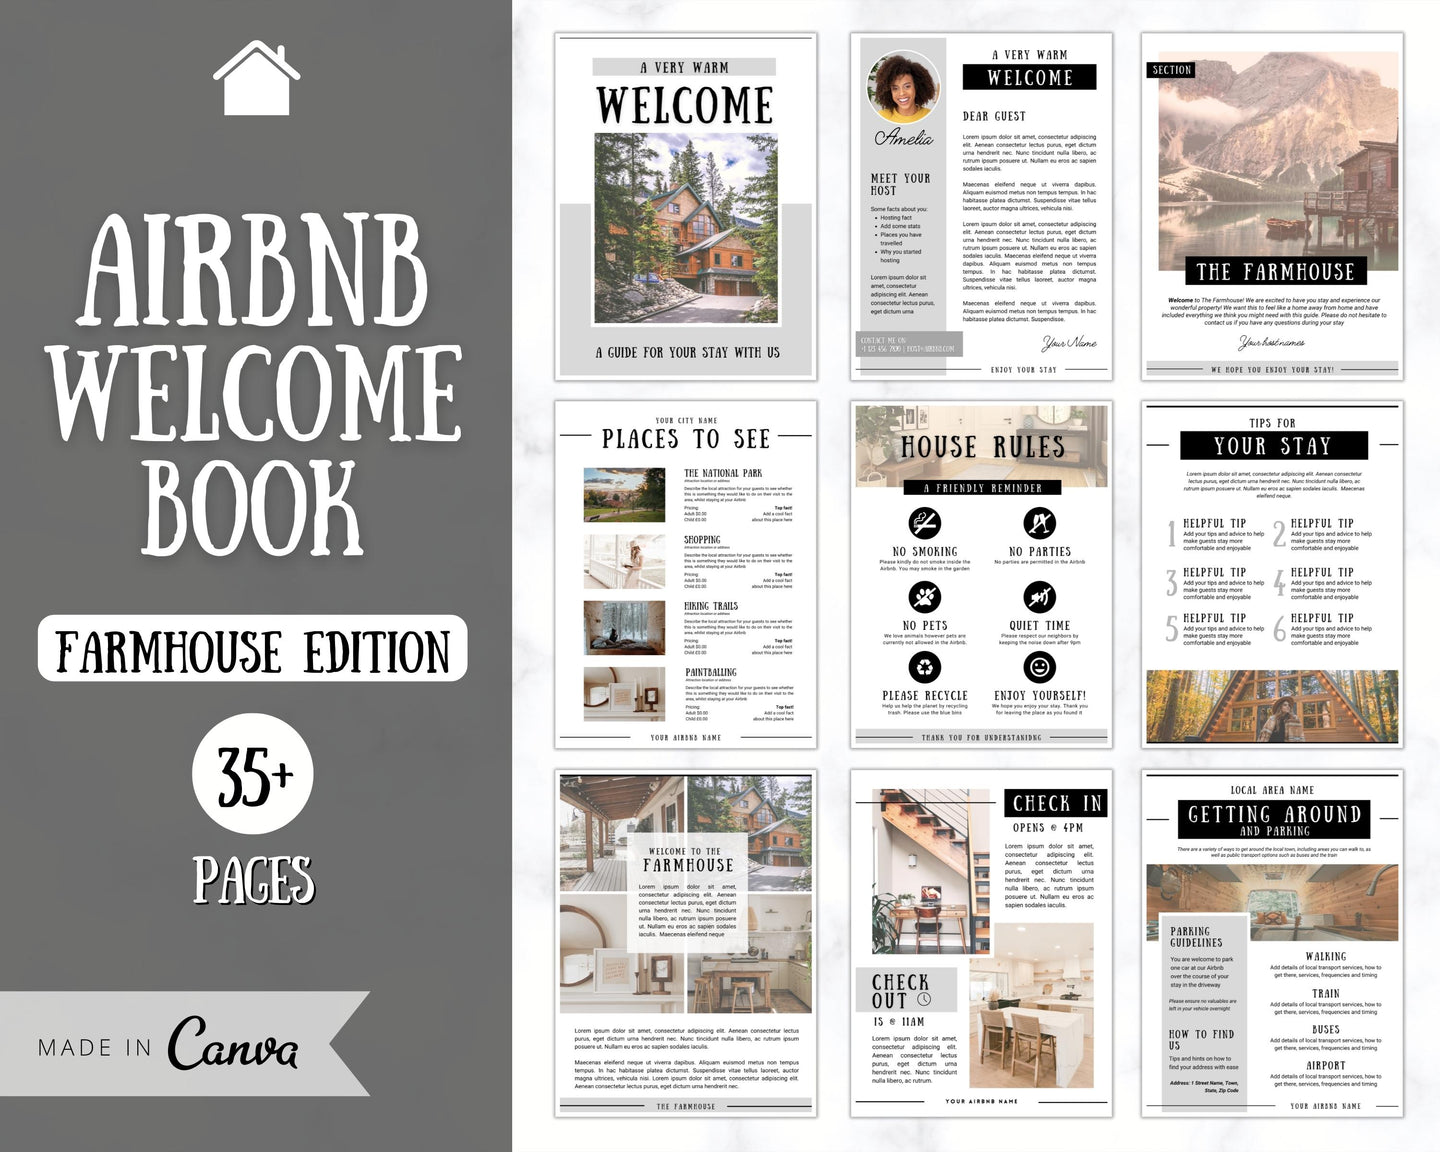 Airbnb Welcome Book Template | Editable Canva Welcome Guide for Vacation Rentals | Farmhouse